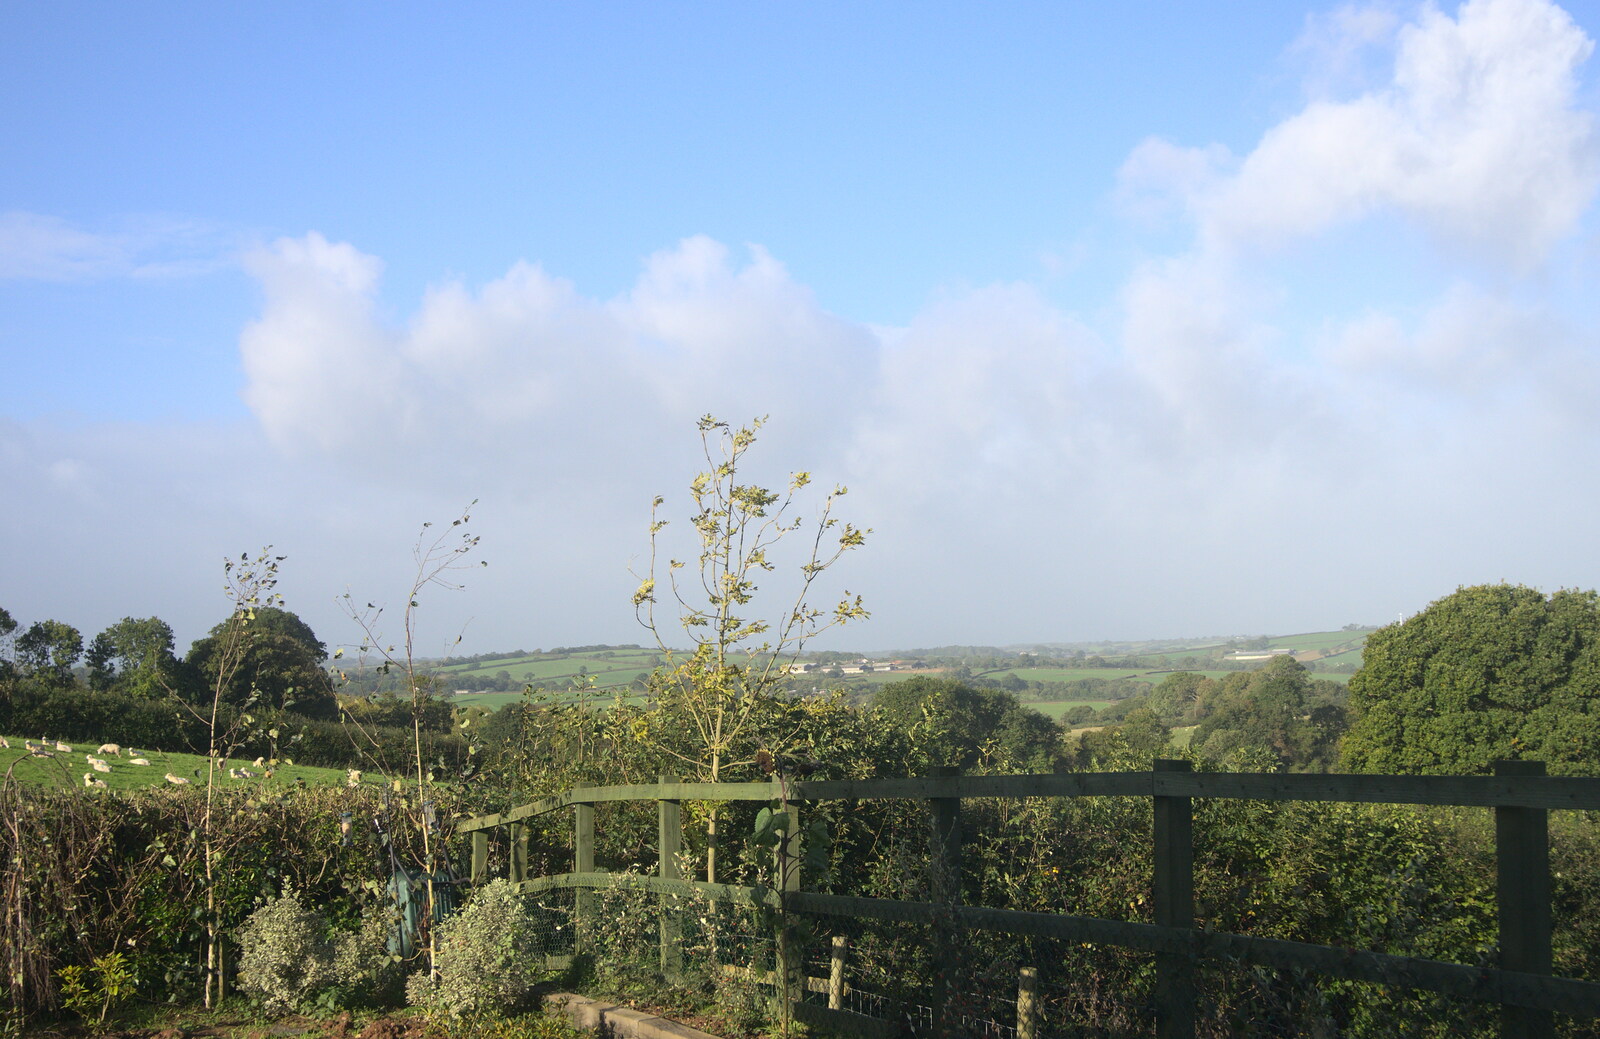 The view from Mother's garden from A Few Days in Spreyton, Devon - 26th October 2013